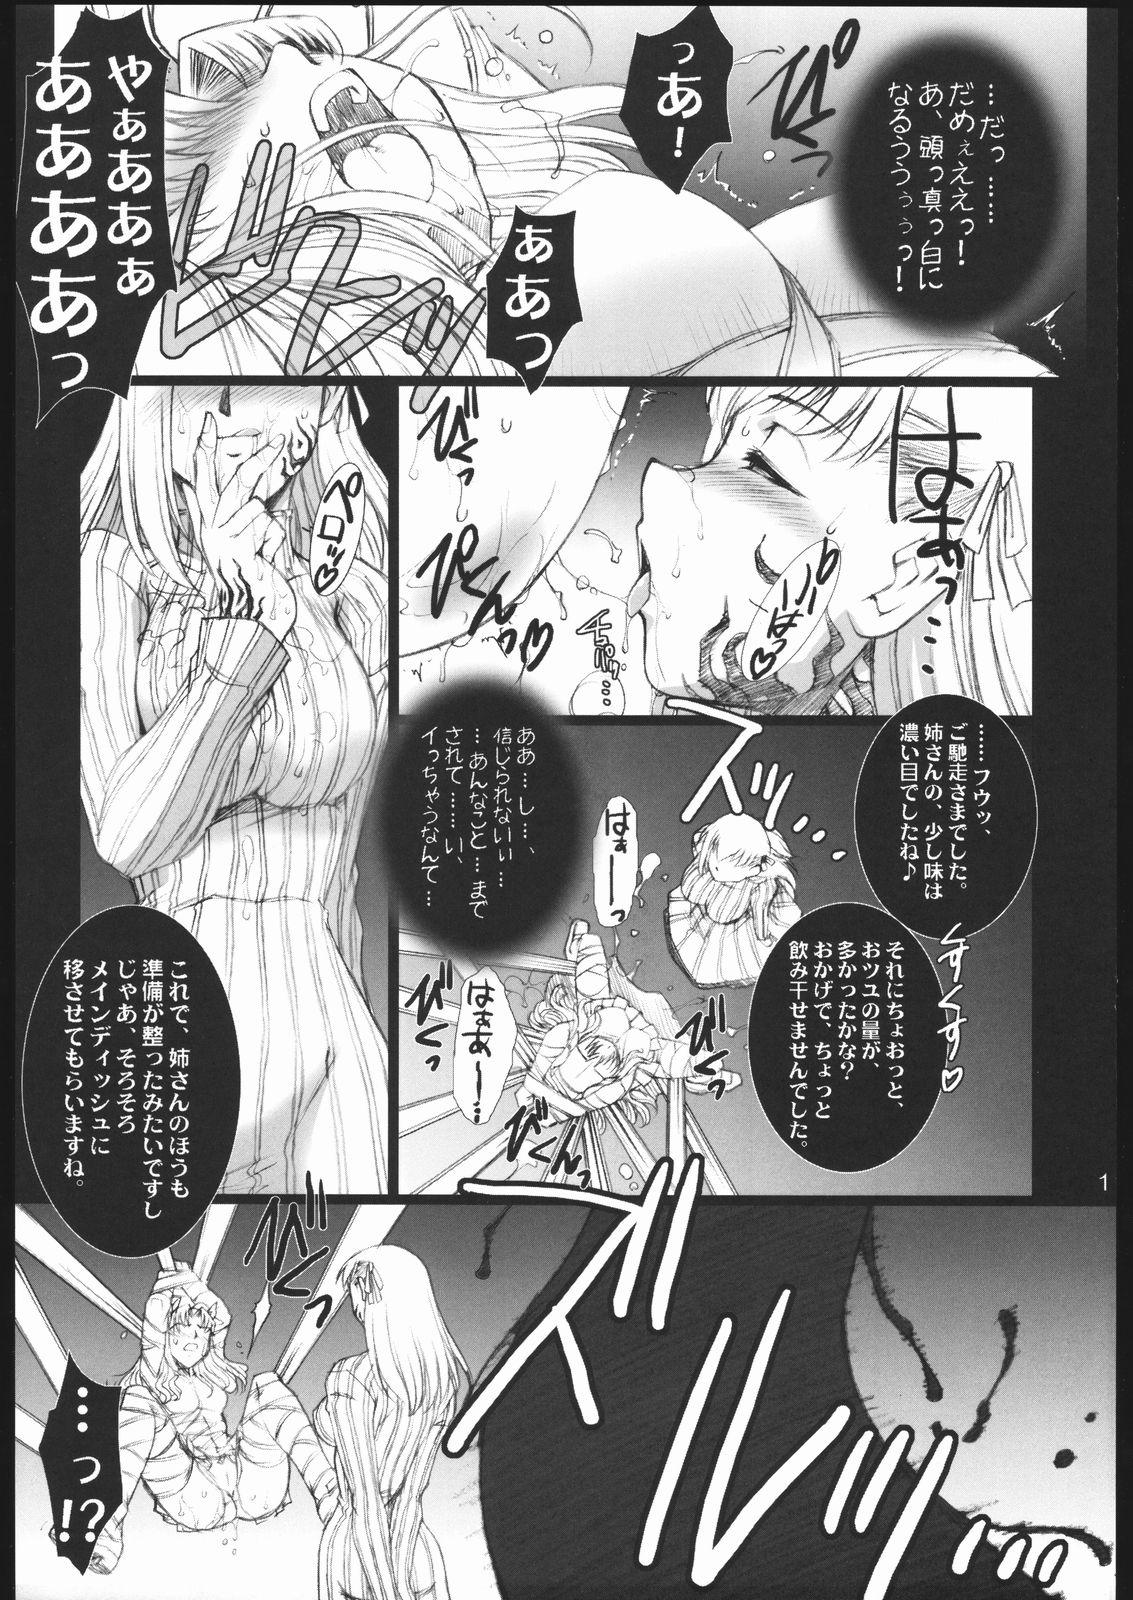 Van Red Degeneration - Fate stay night Coed - Page 10